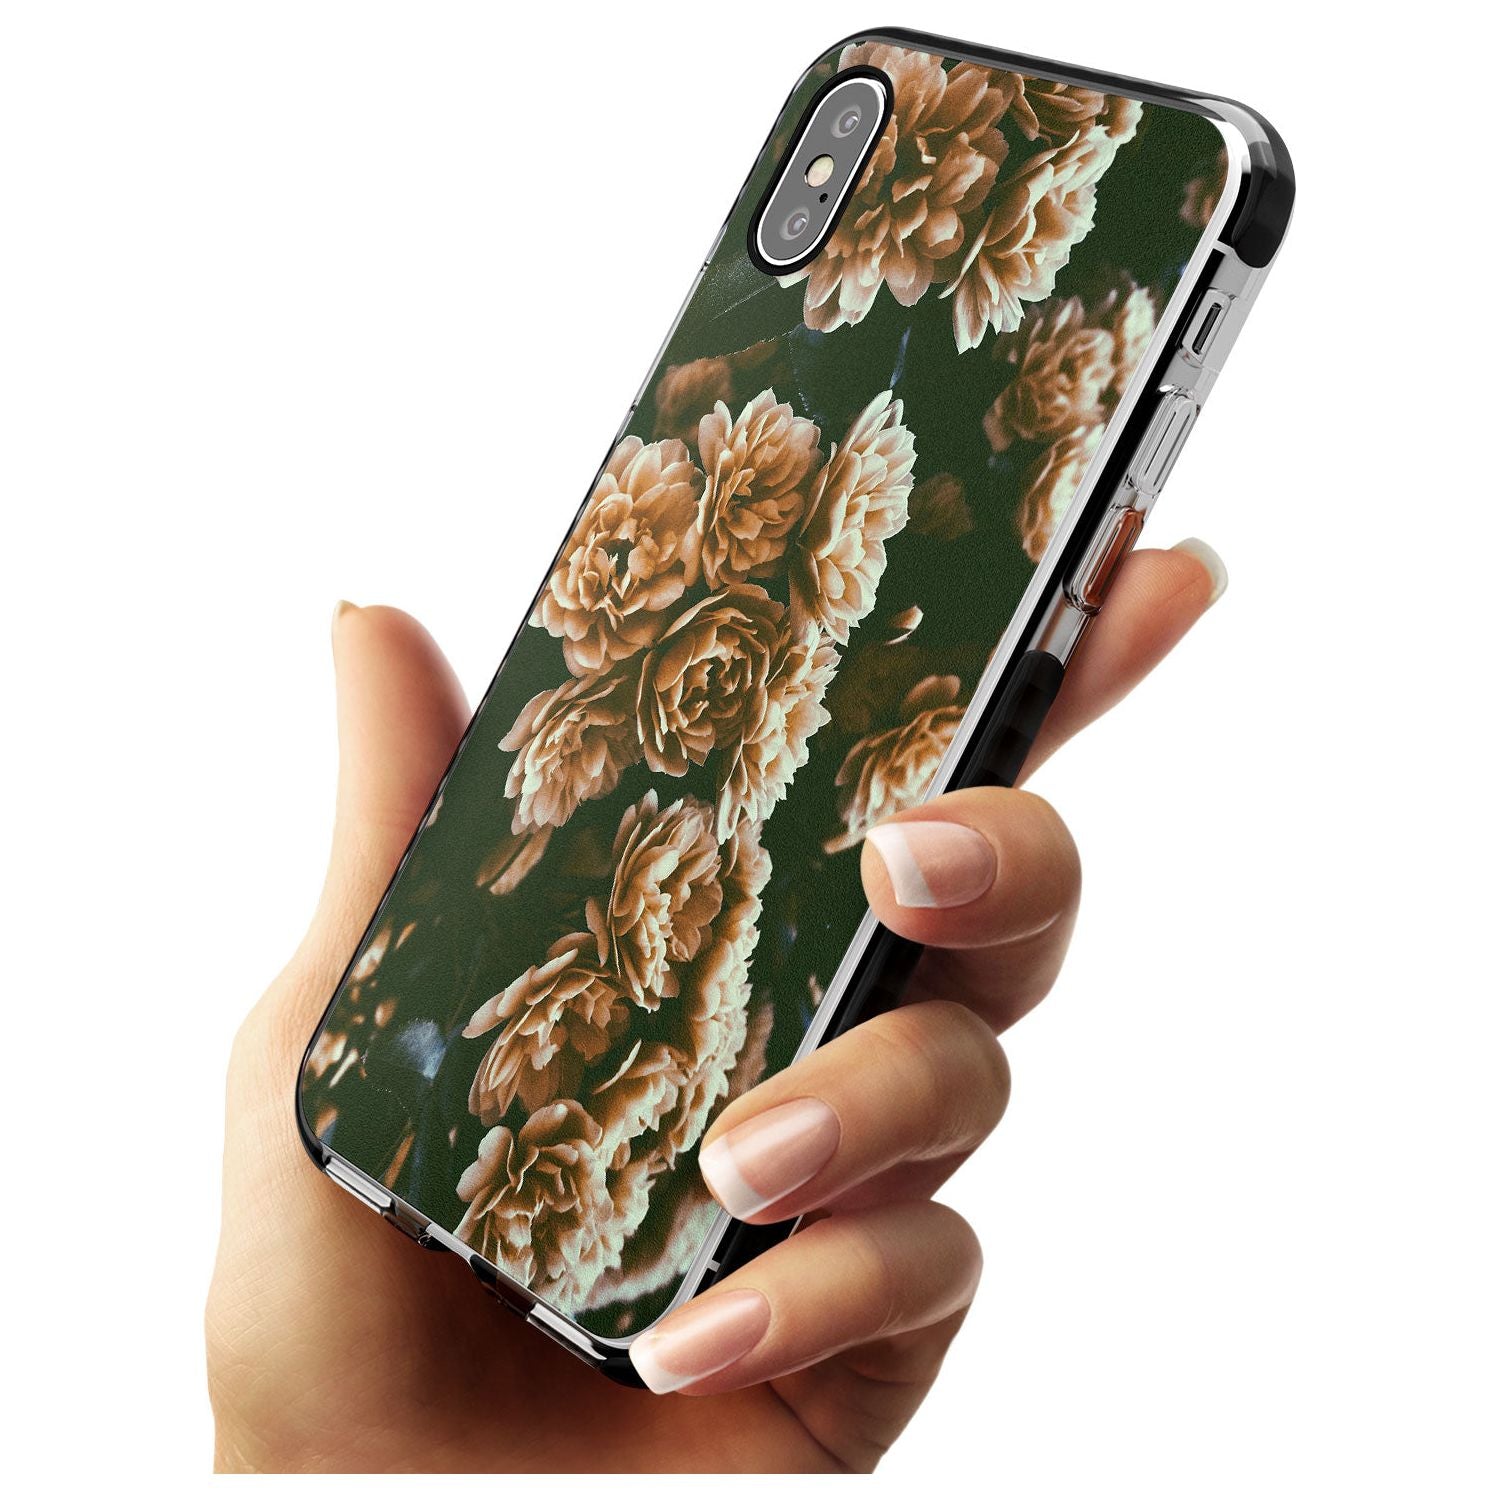 White Peonies - Real Floral Photographs Black Impact Phone Case for iPhone X XS Max XR